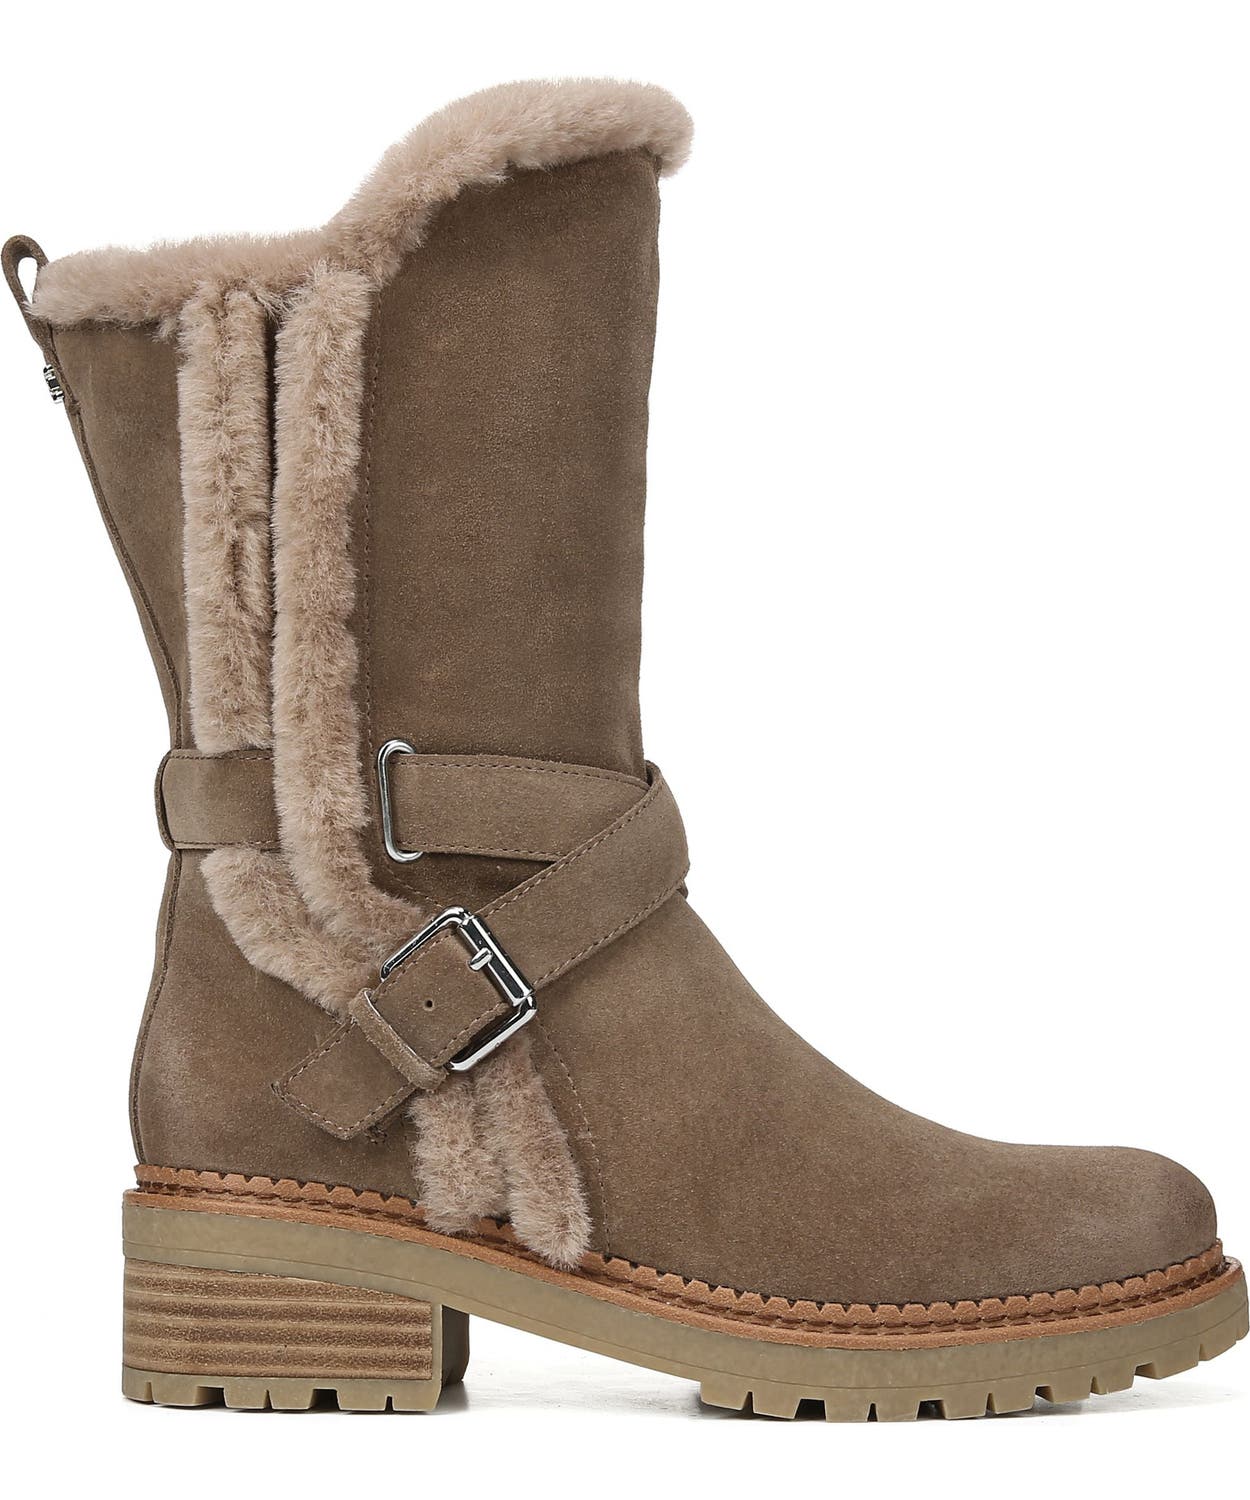 woocommerce-673321-2209615.cloudwaysapps.com-sam-edelman-womens-brown-suede-jailyn-mid-calf-boots